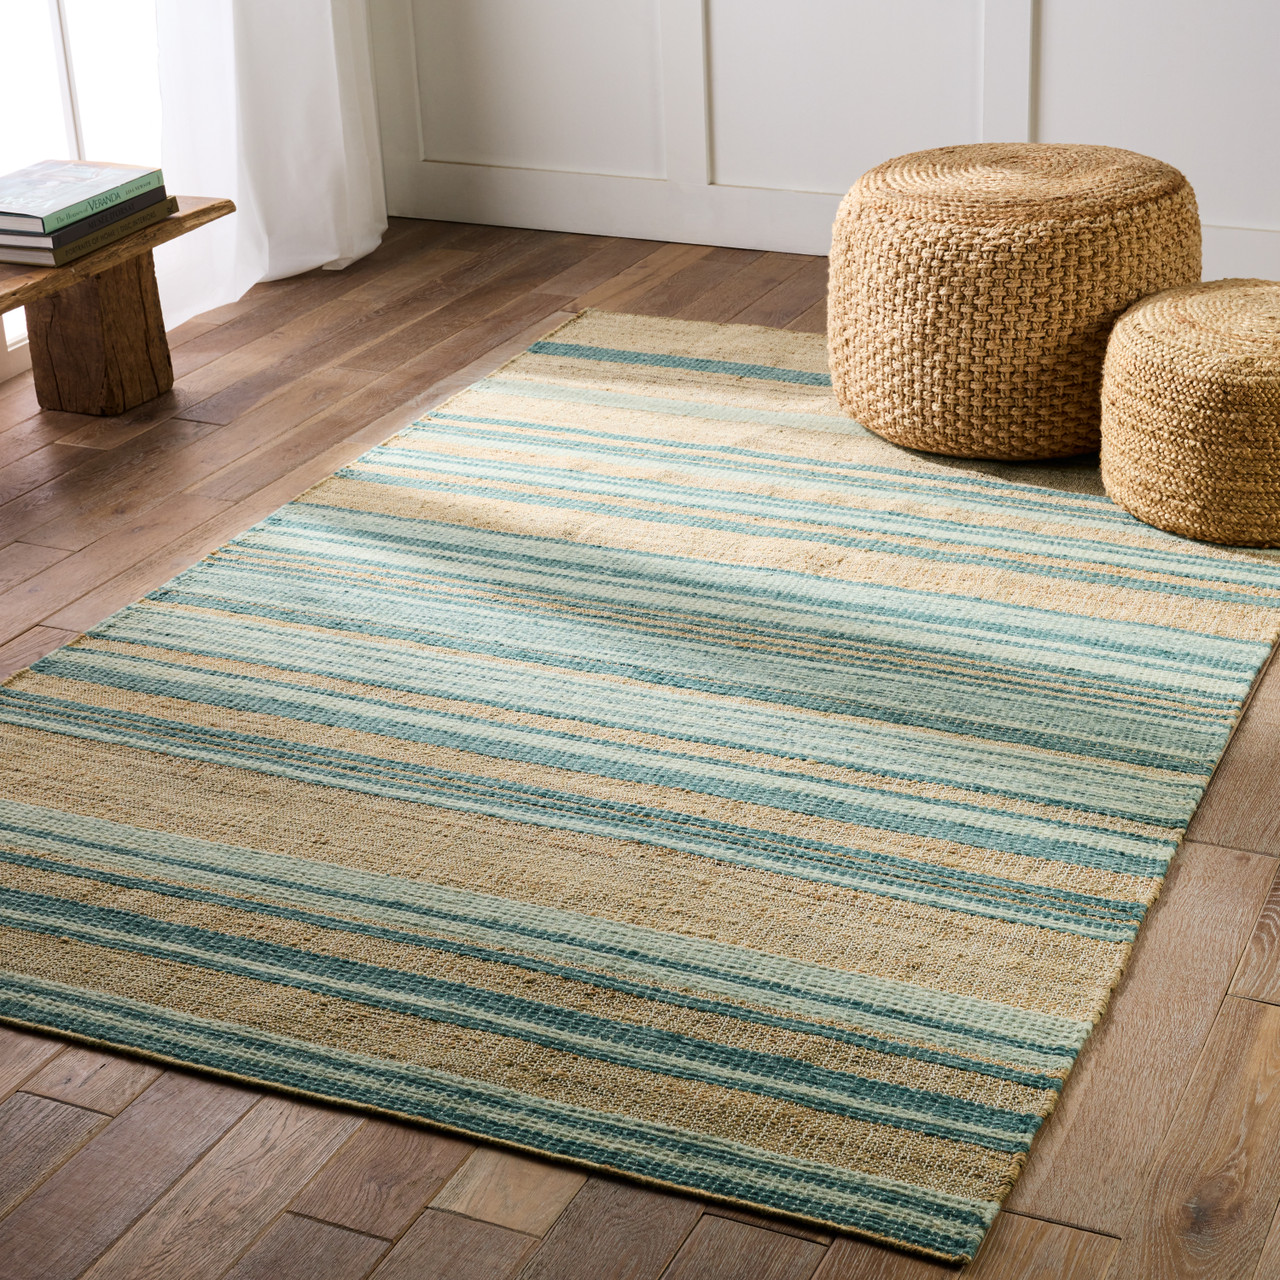 Natural Woven Jute and Seagrass Rugs